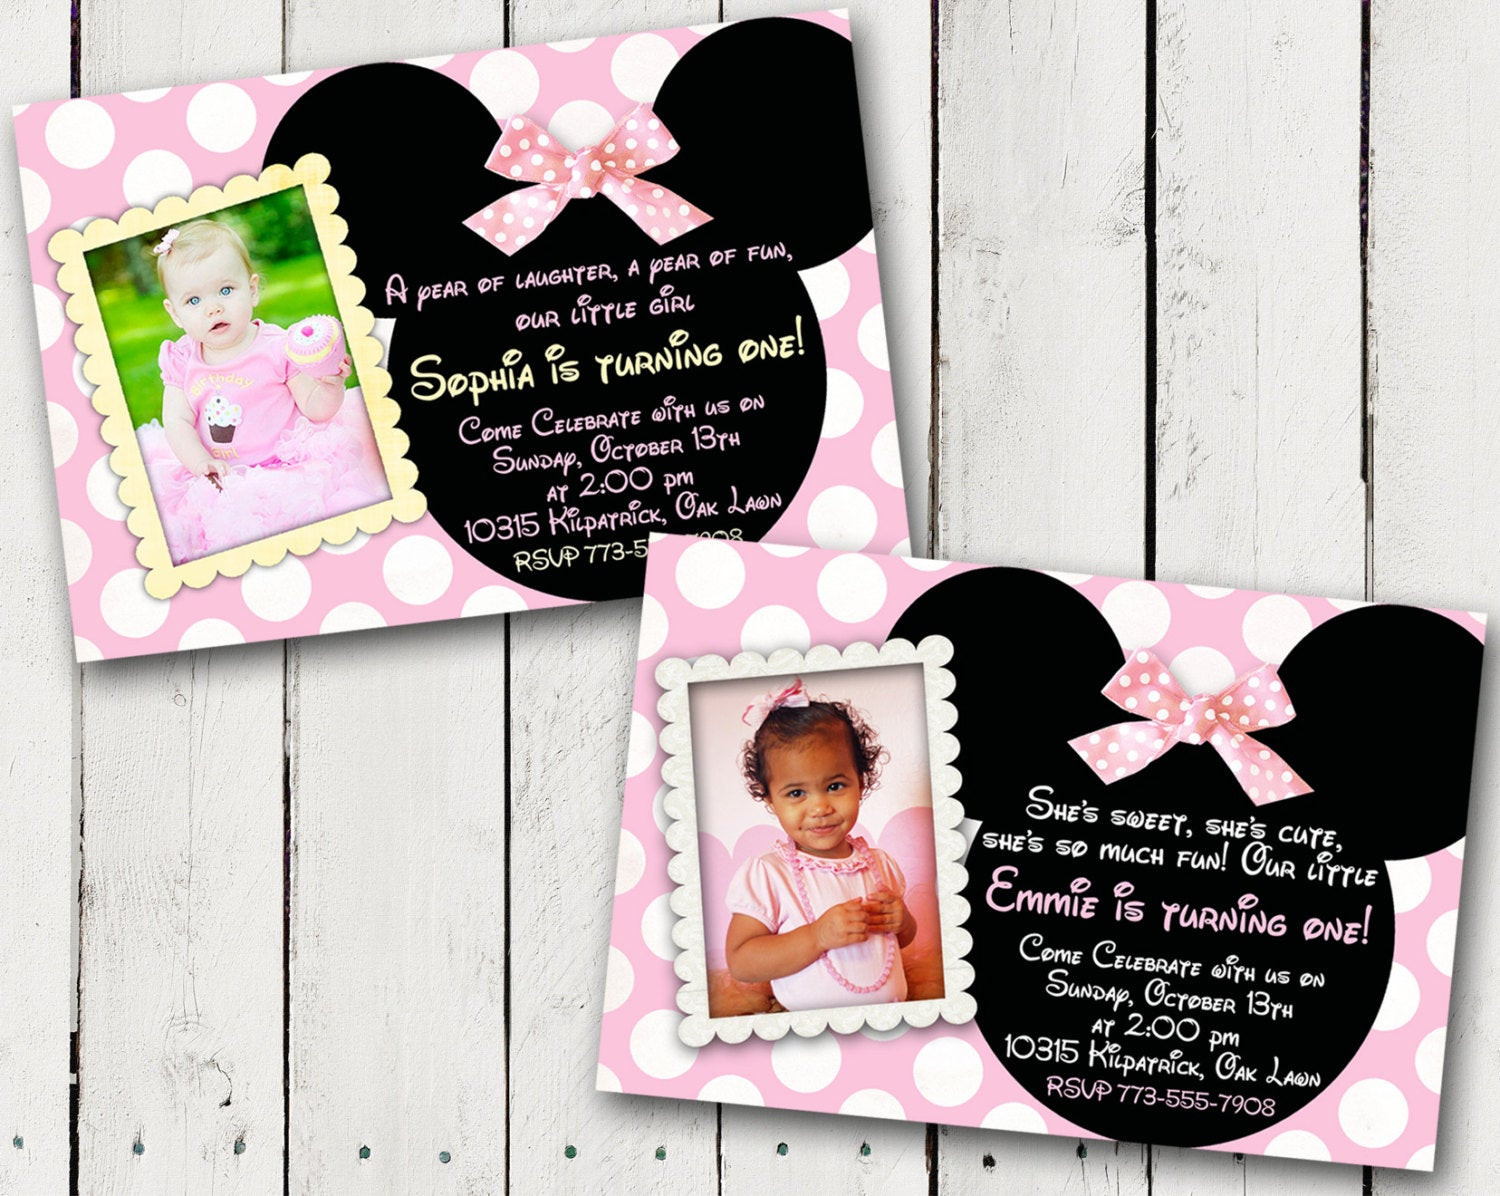 Baby Minnie Mouse 1st Birthday Invitations
 Baby Minnie Mouse 1st Birthday Party Invitations